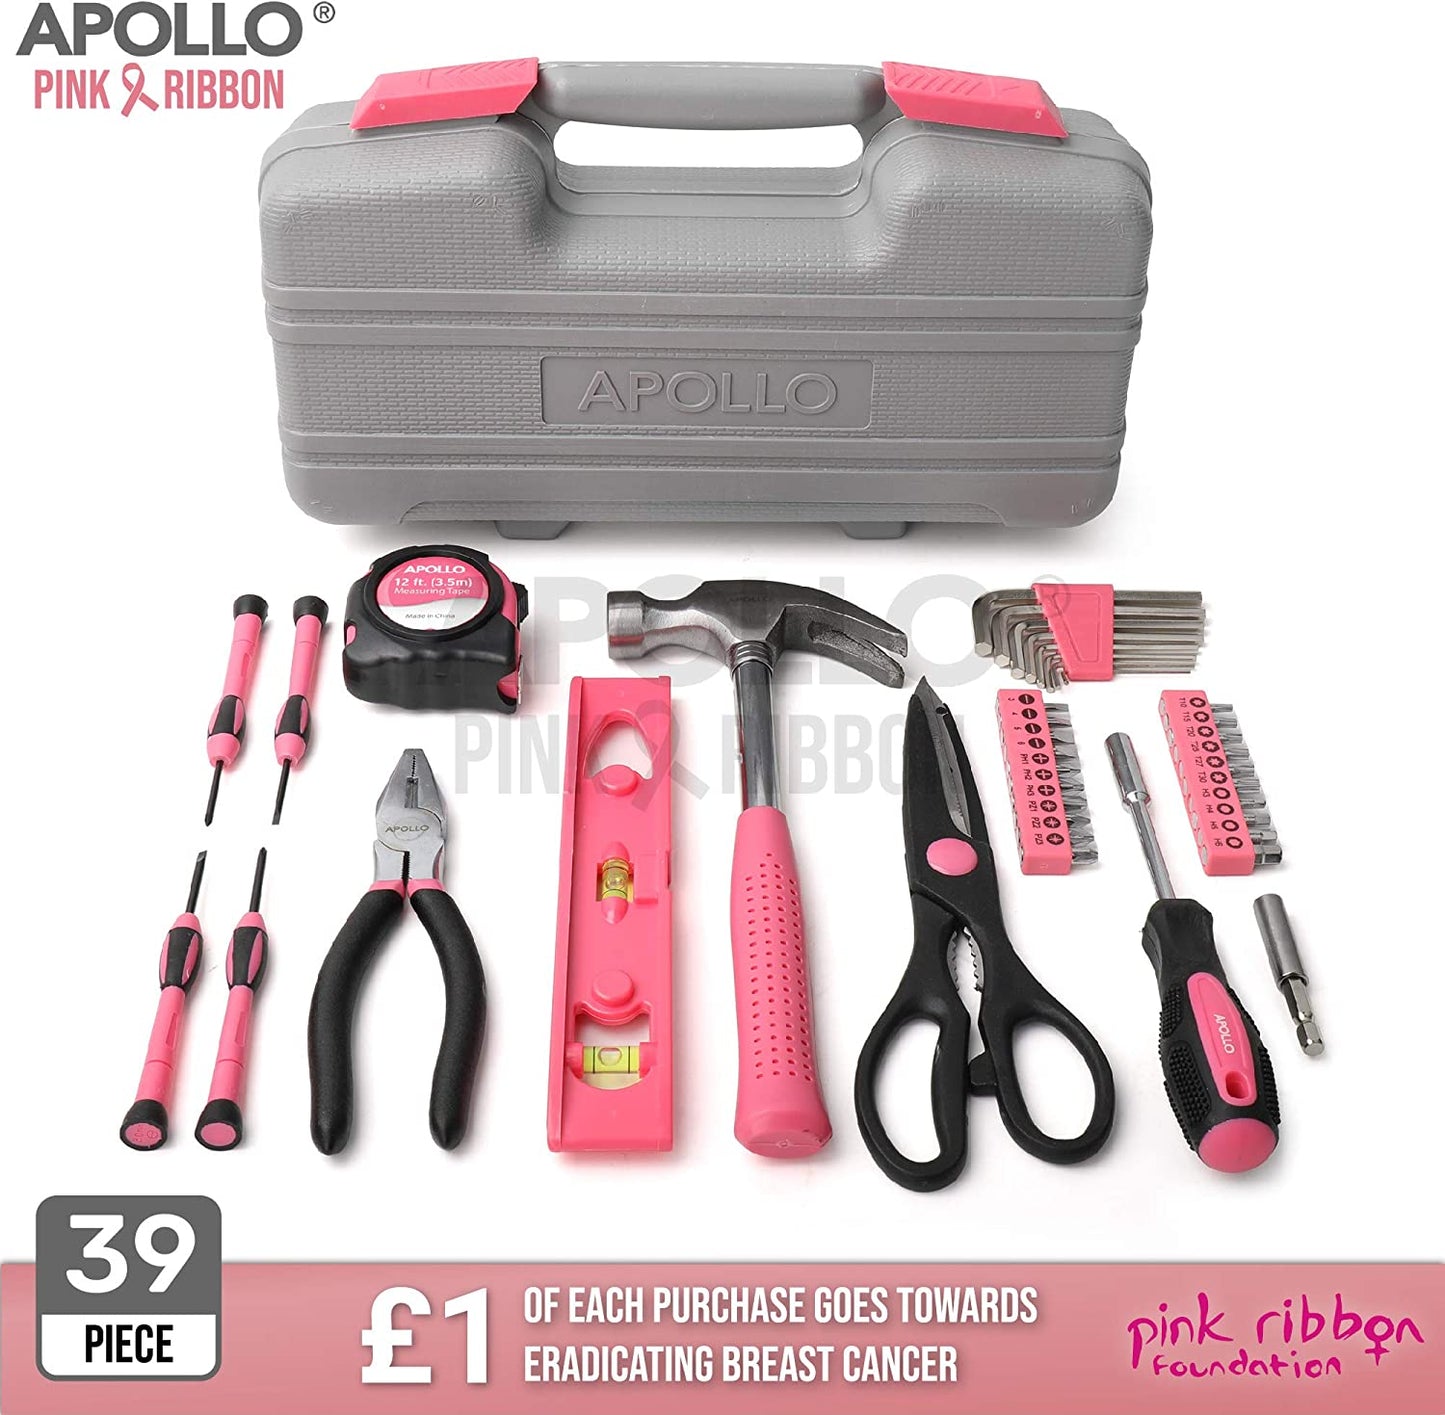 Home Tool Kit,  DT9706PUK, 39 Piece Ladies Set with Most Reached for Pink DIY Tools